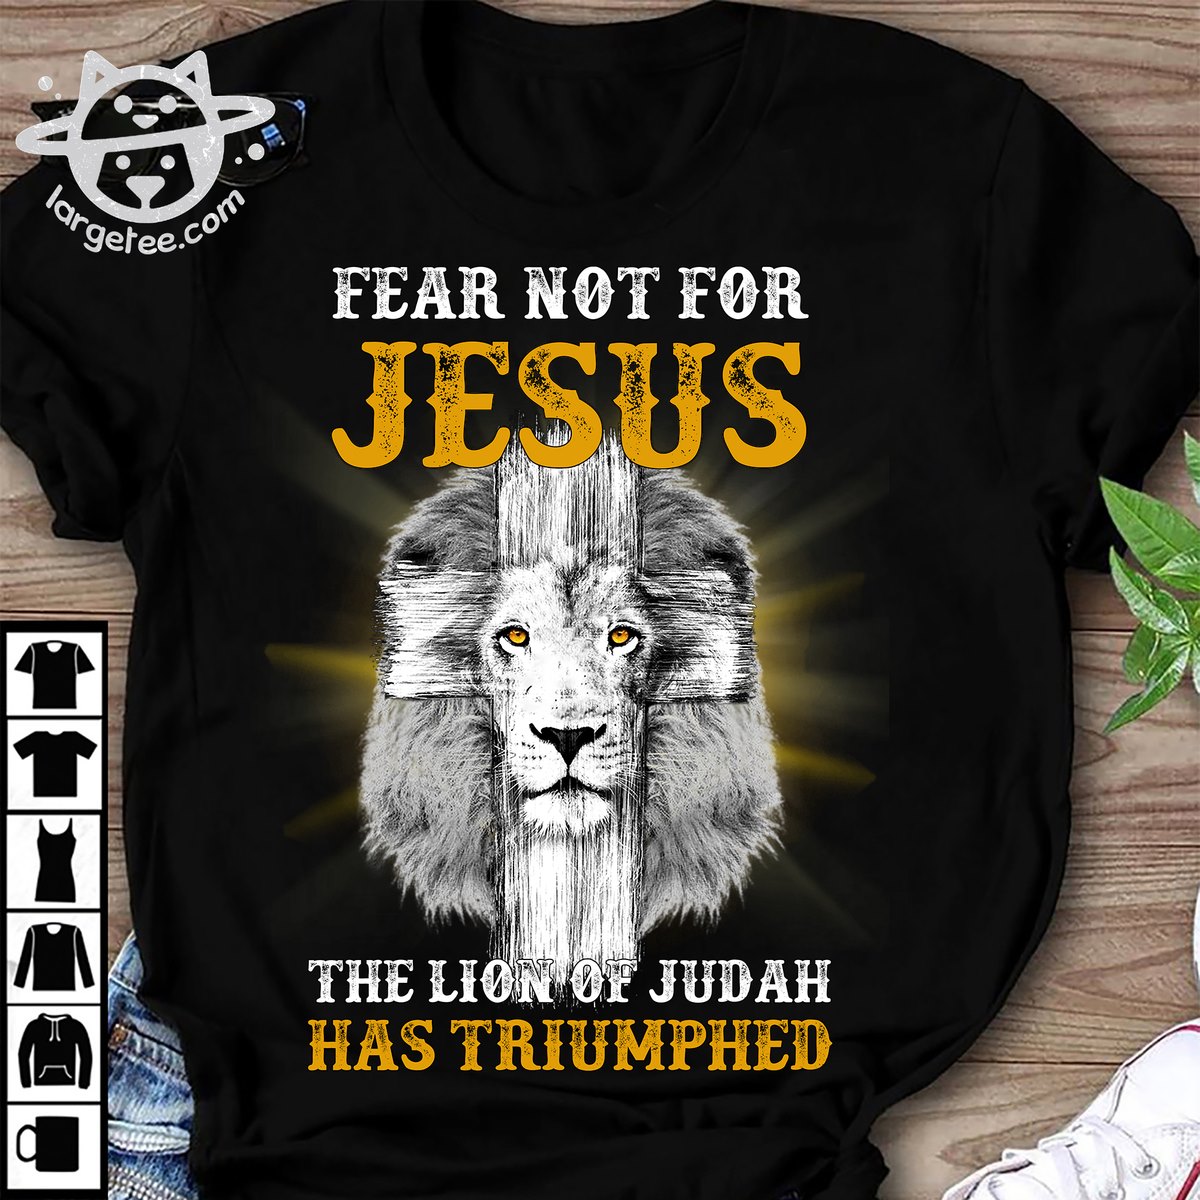 Fear not for Jesus - The lion of Judah has triumphed